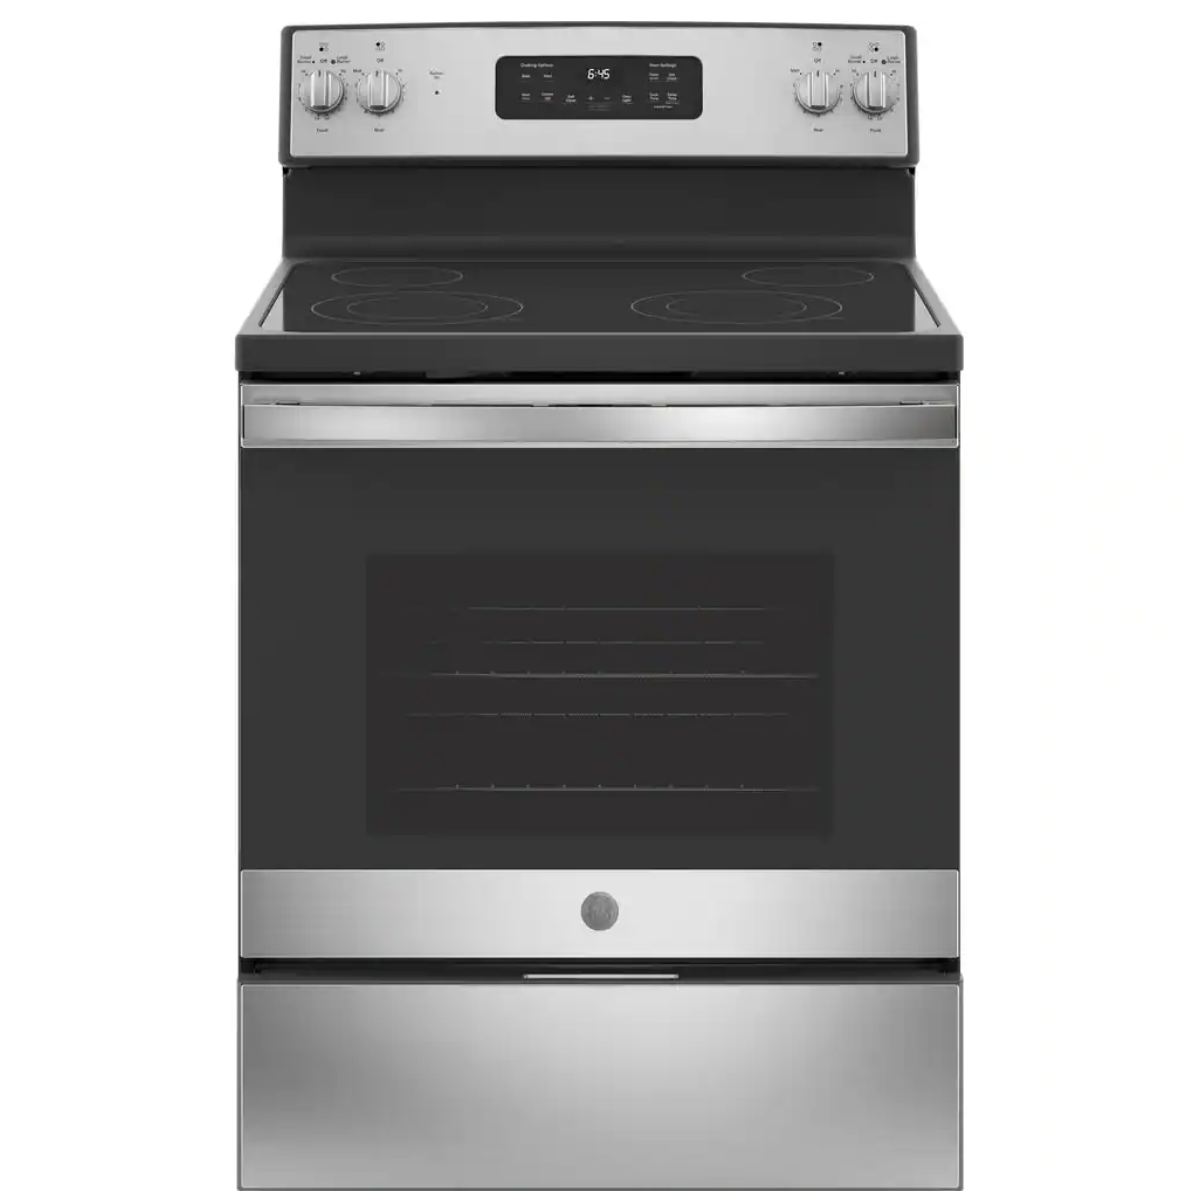 GE - 30-in 5.3 Cu. Ft. Electric Range with Self-Cleaning Oven in Stainless Steel